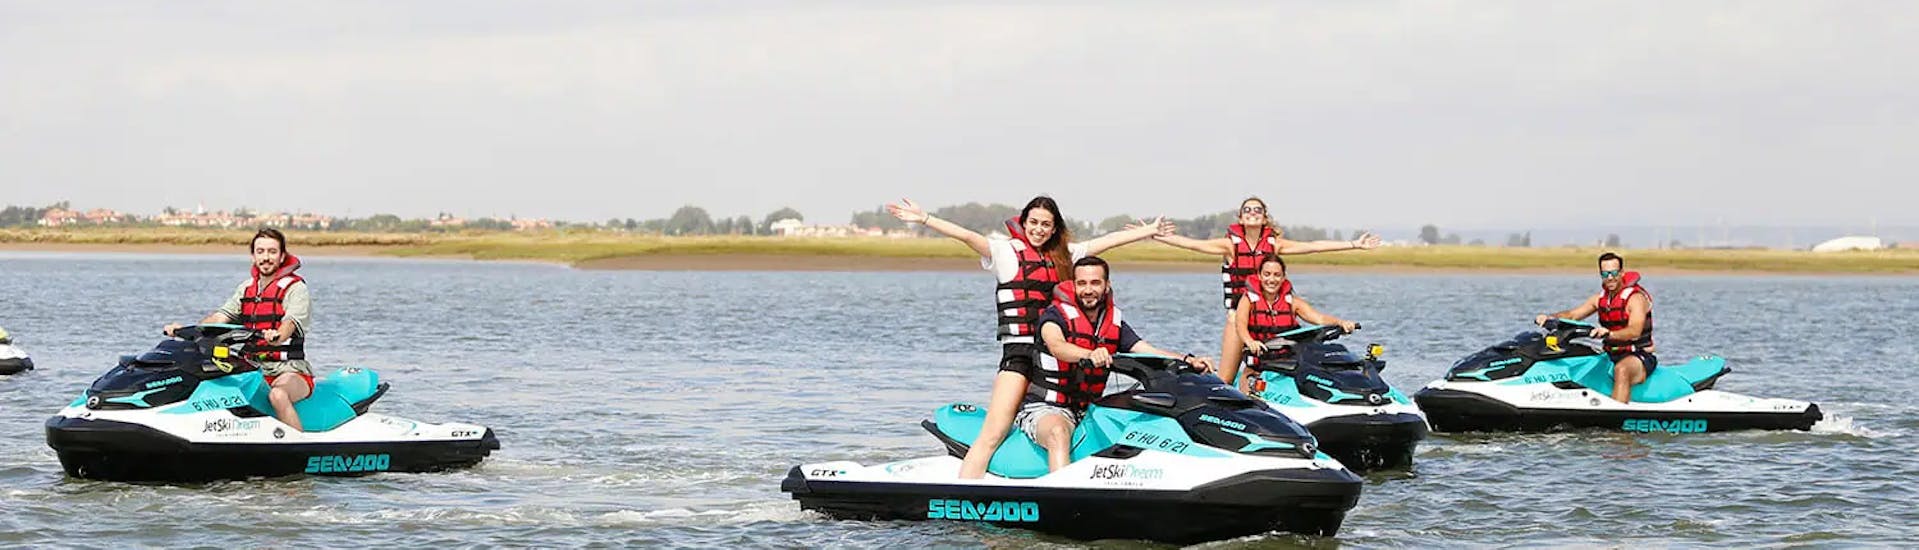 A group of participants during a fun stop along the Guadiana River during a ski safari along the river between Spain and Portugal with Jet Ski Dreams Huelva.